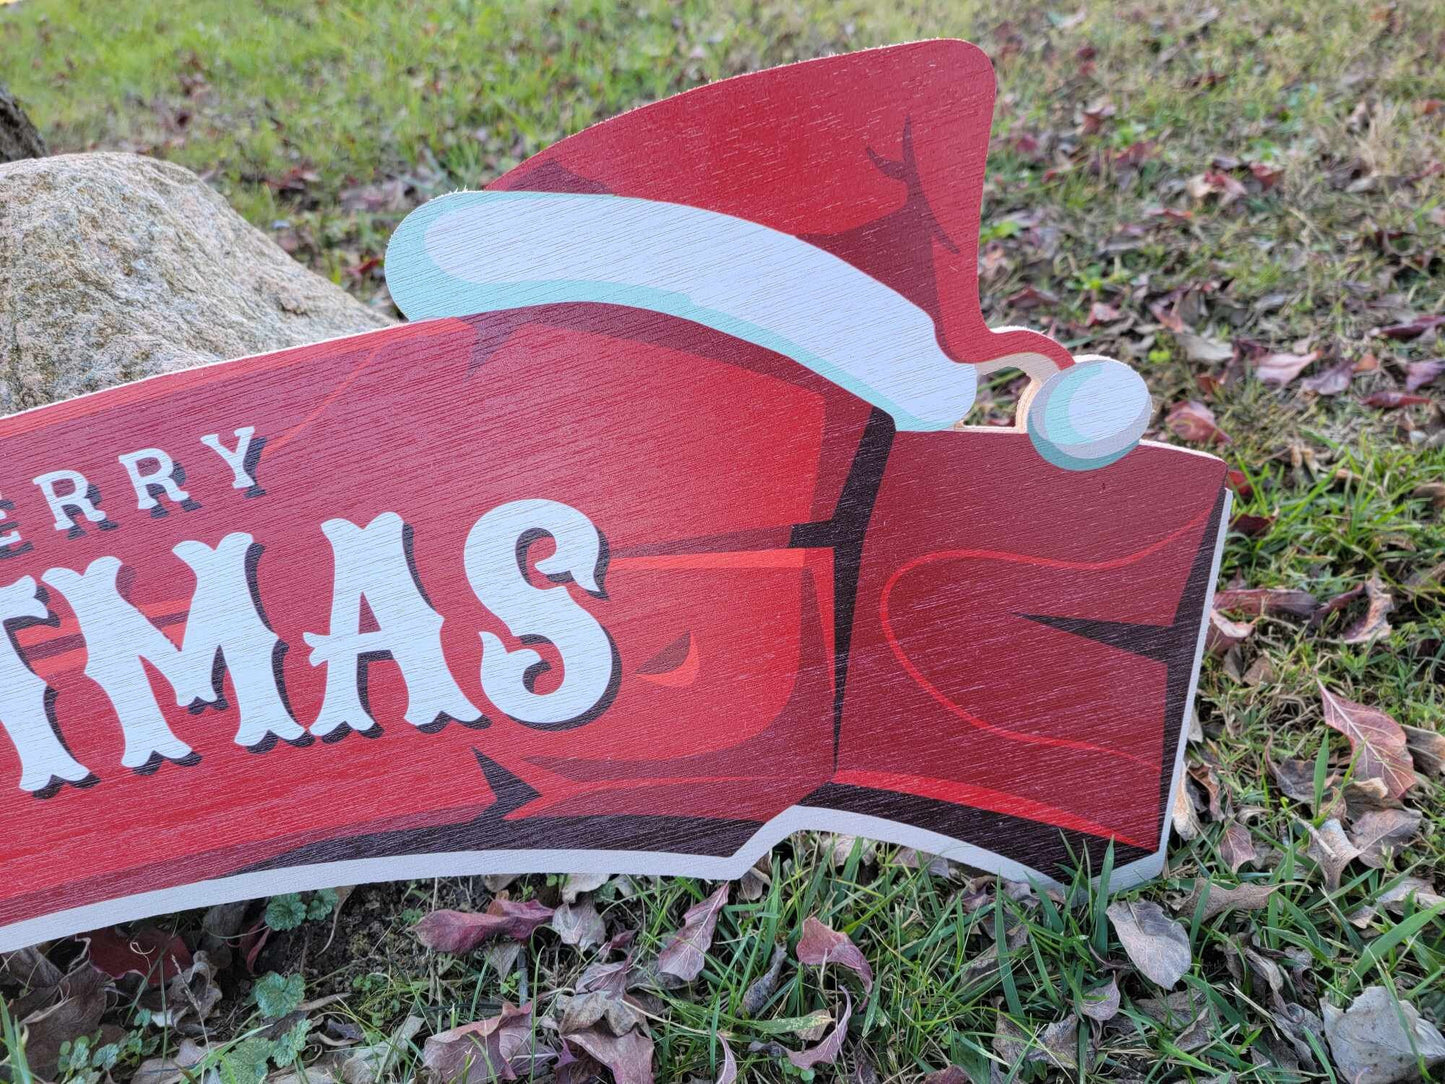 Large Merry and Happy Christmas sign banner for over the door or doorway red wood sign santa hat red and white on rustic wood planks